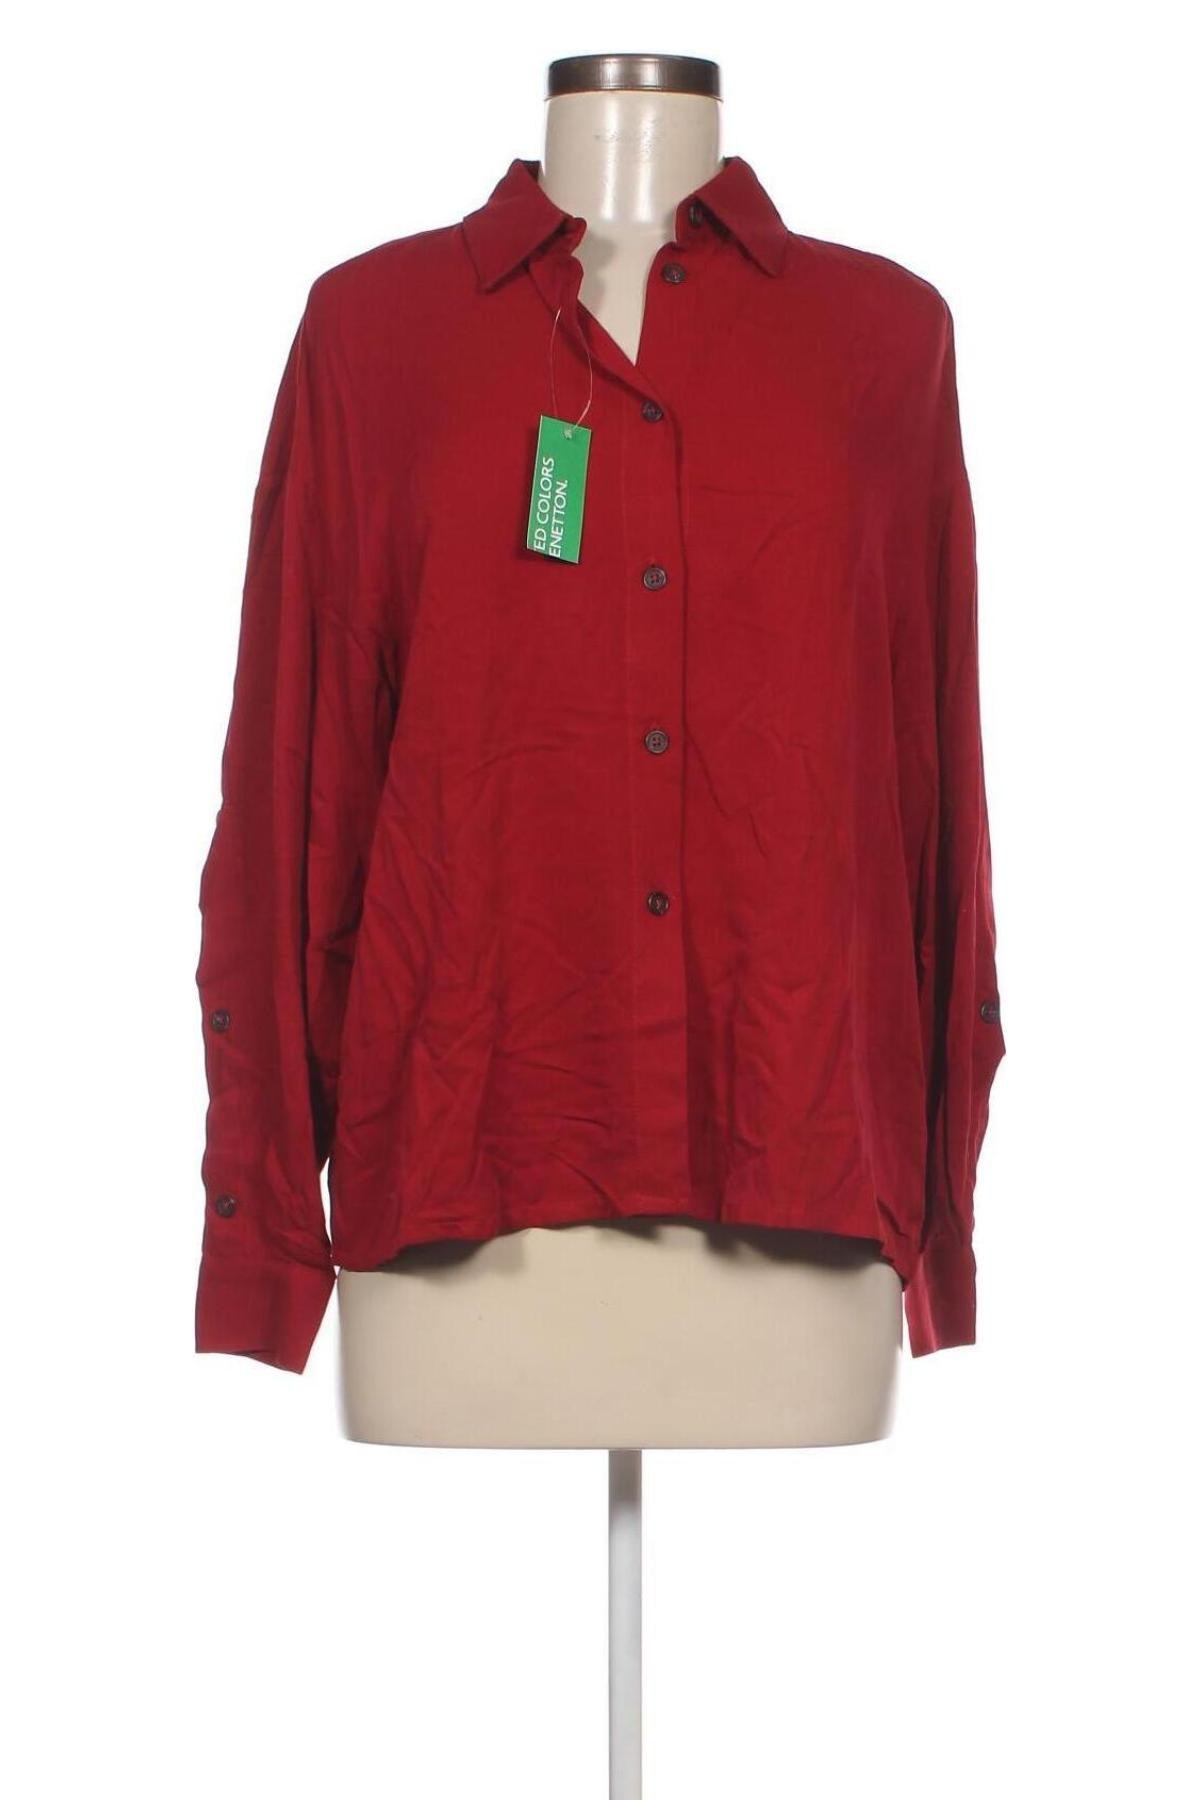 Damenbluse United Colors Of Benetton, Größe XS, Farbe Rot, Preis € 11,13